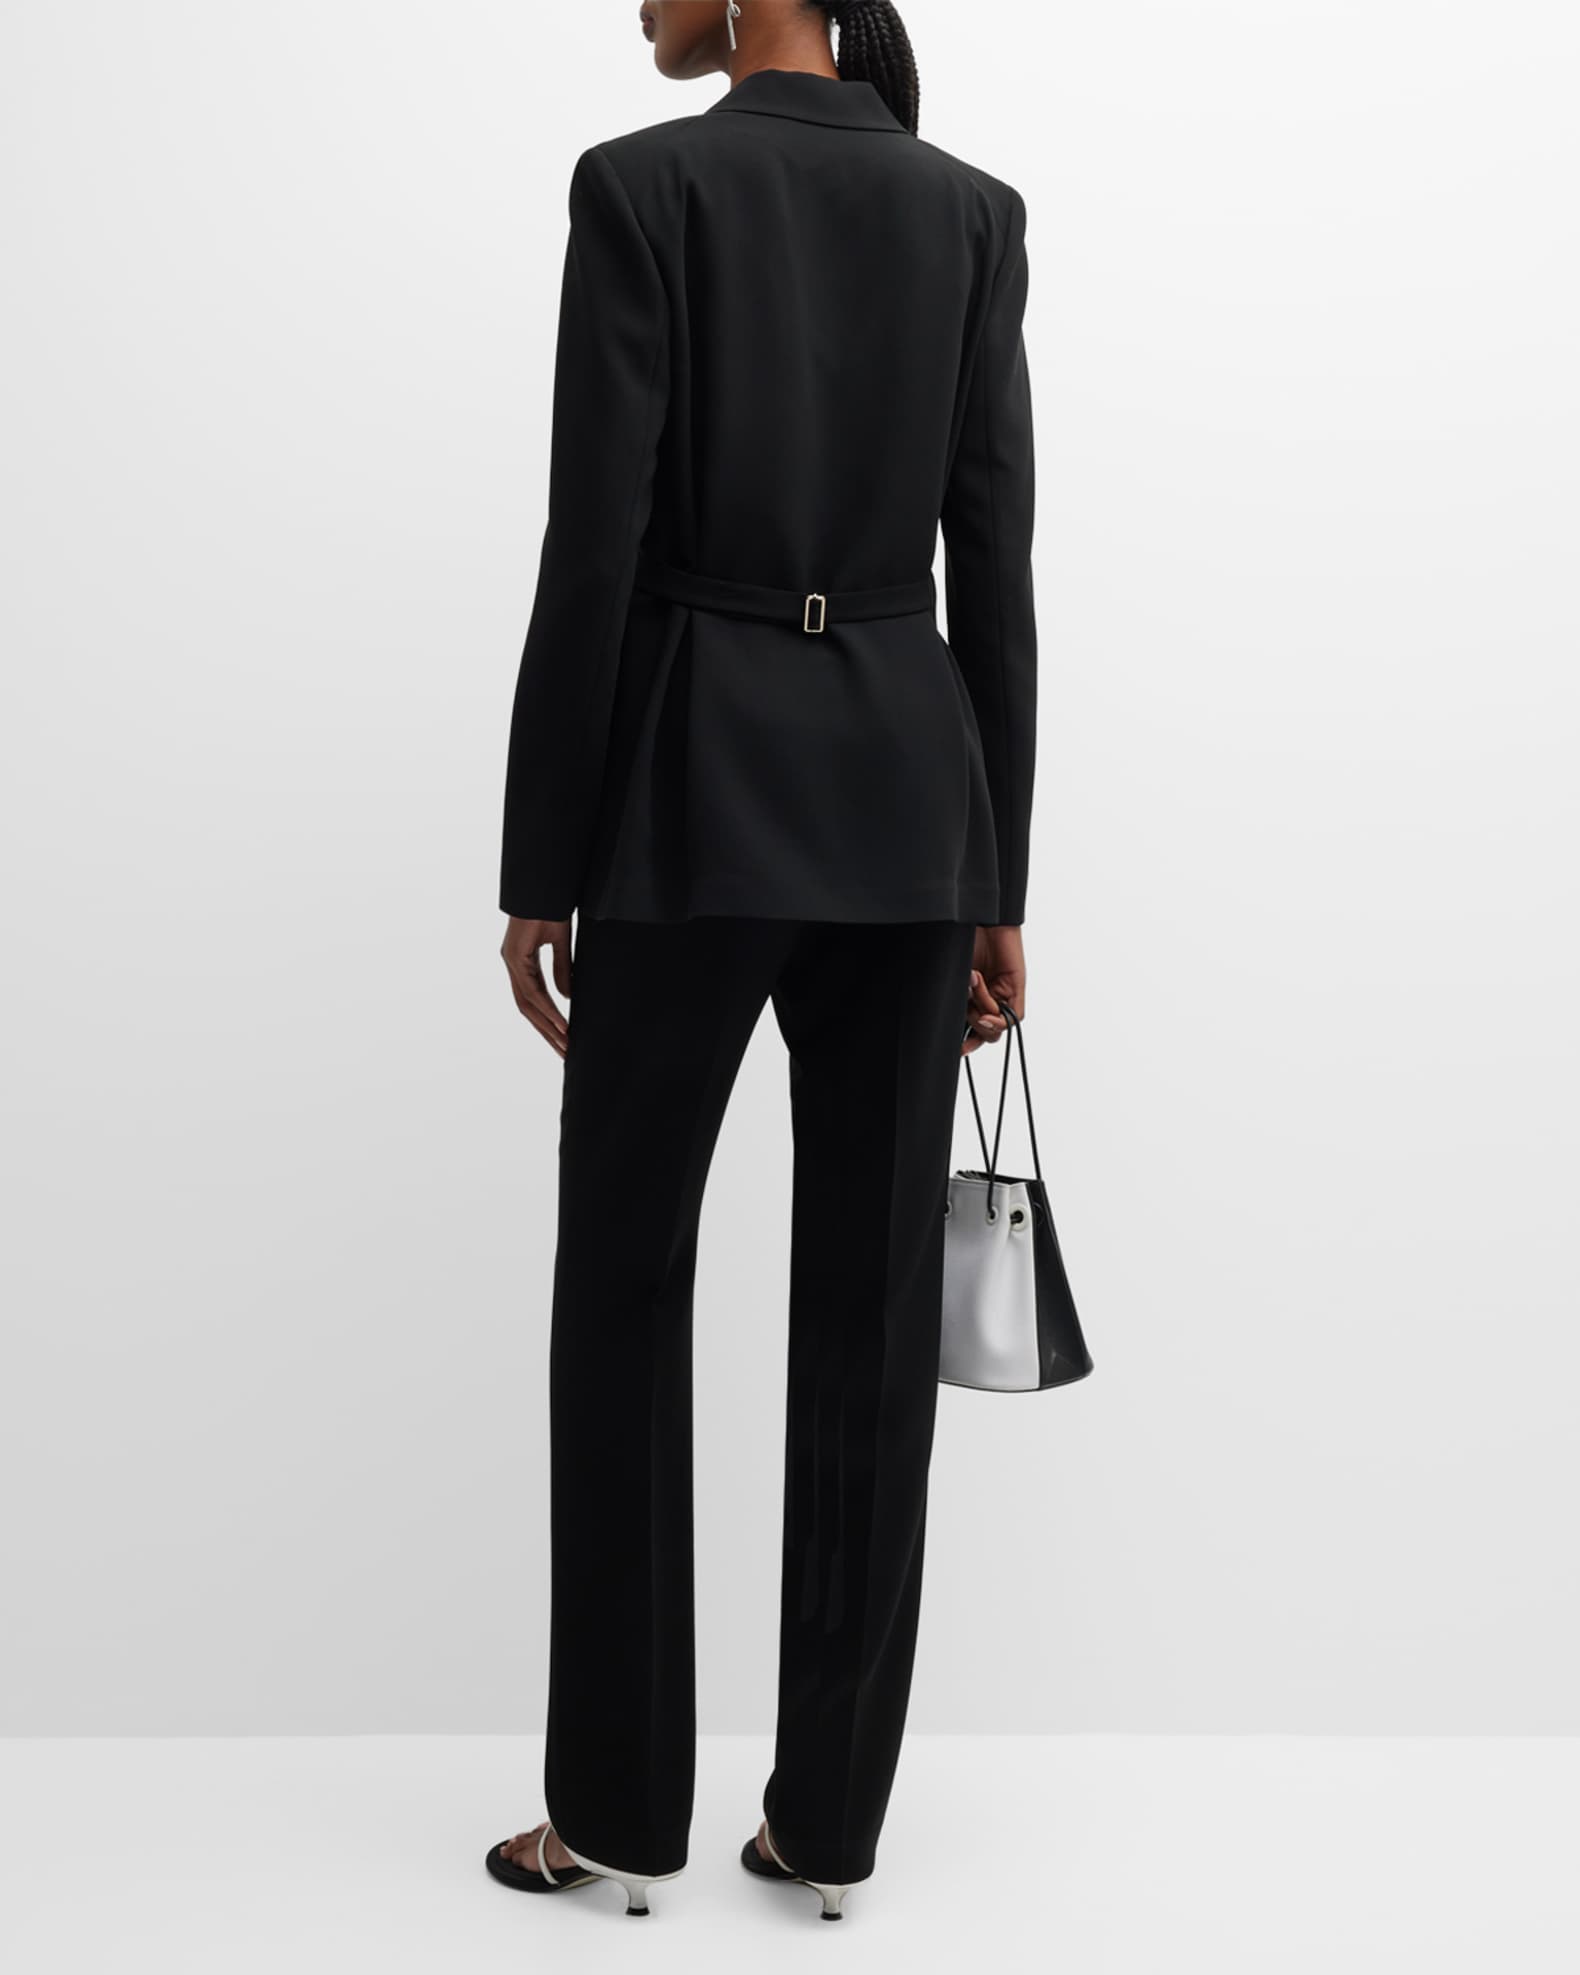 Belted Back Suit | Neiman Marcus